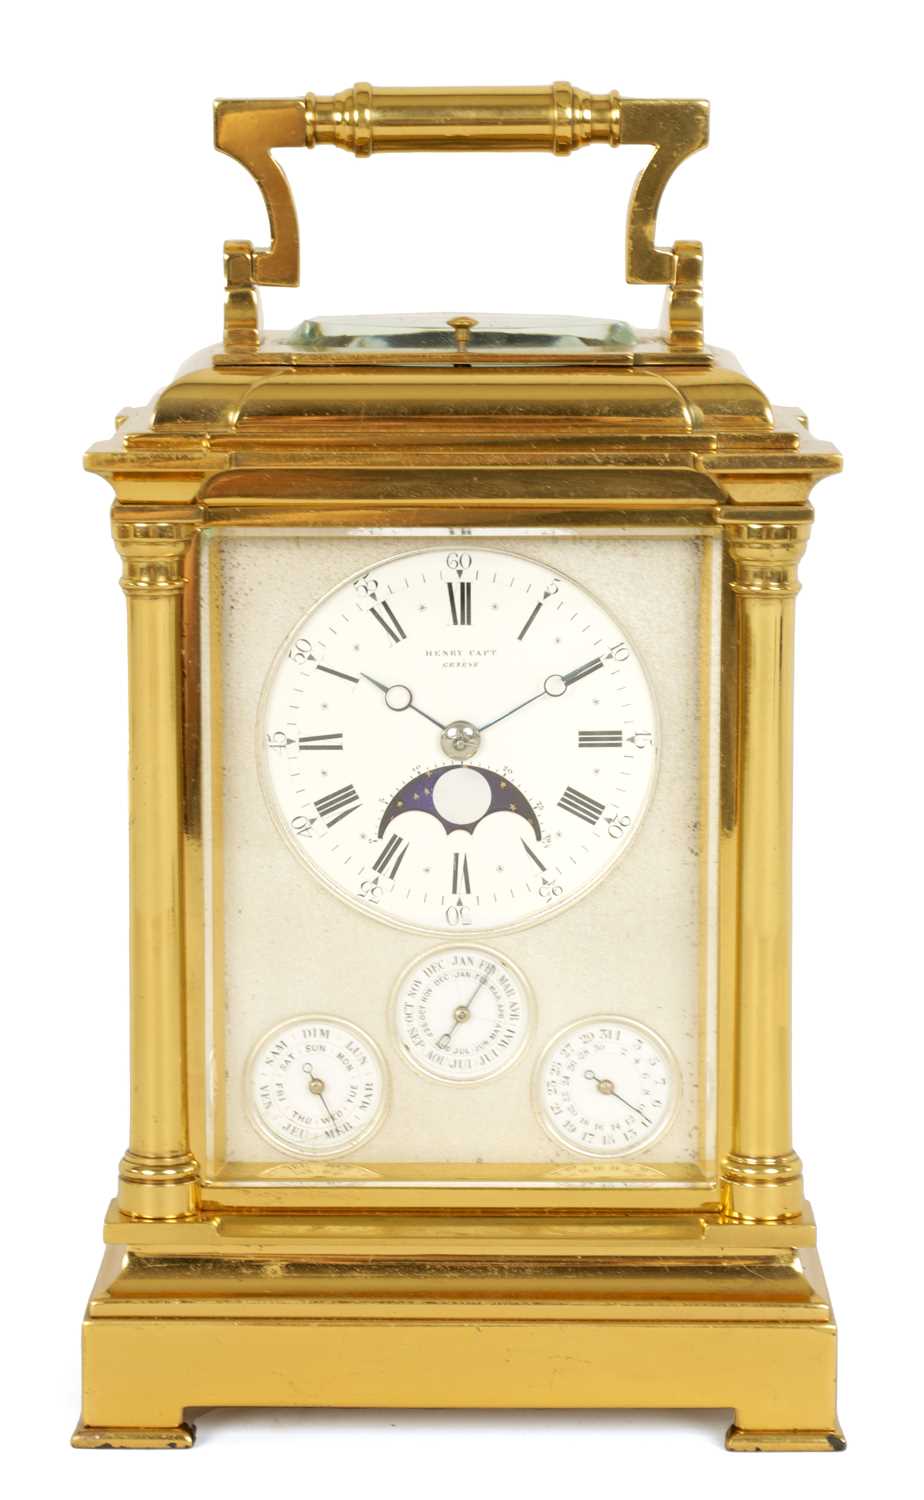 Lot 713 - MARGAINE.  A FINE AND RARE 19TH CENTURY FRENCH GRAND SONNERIE CARRIAGE CLOCK WITH MOONPHASE AND CALENDAR